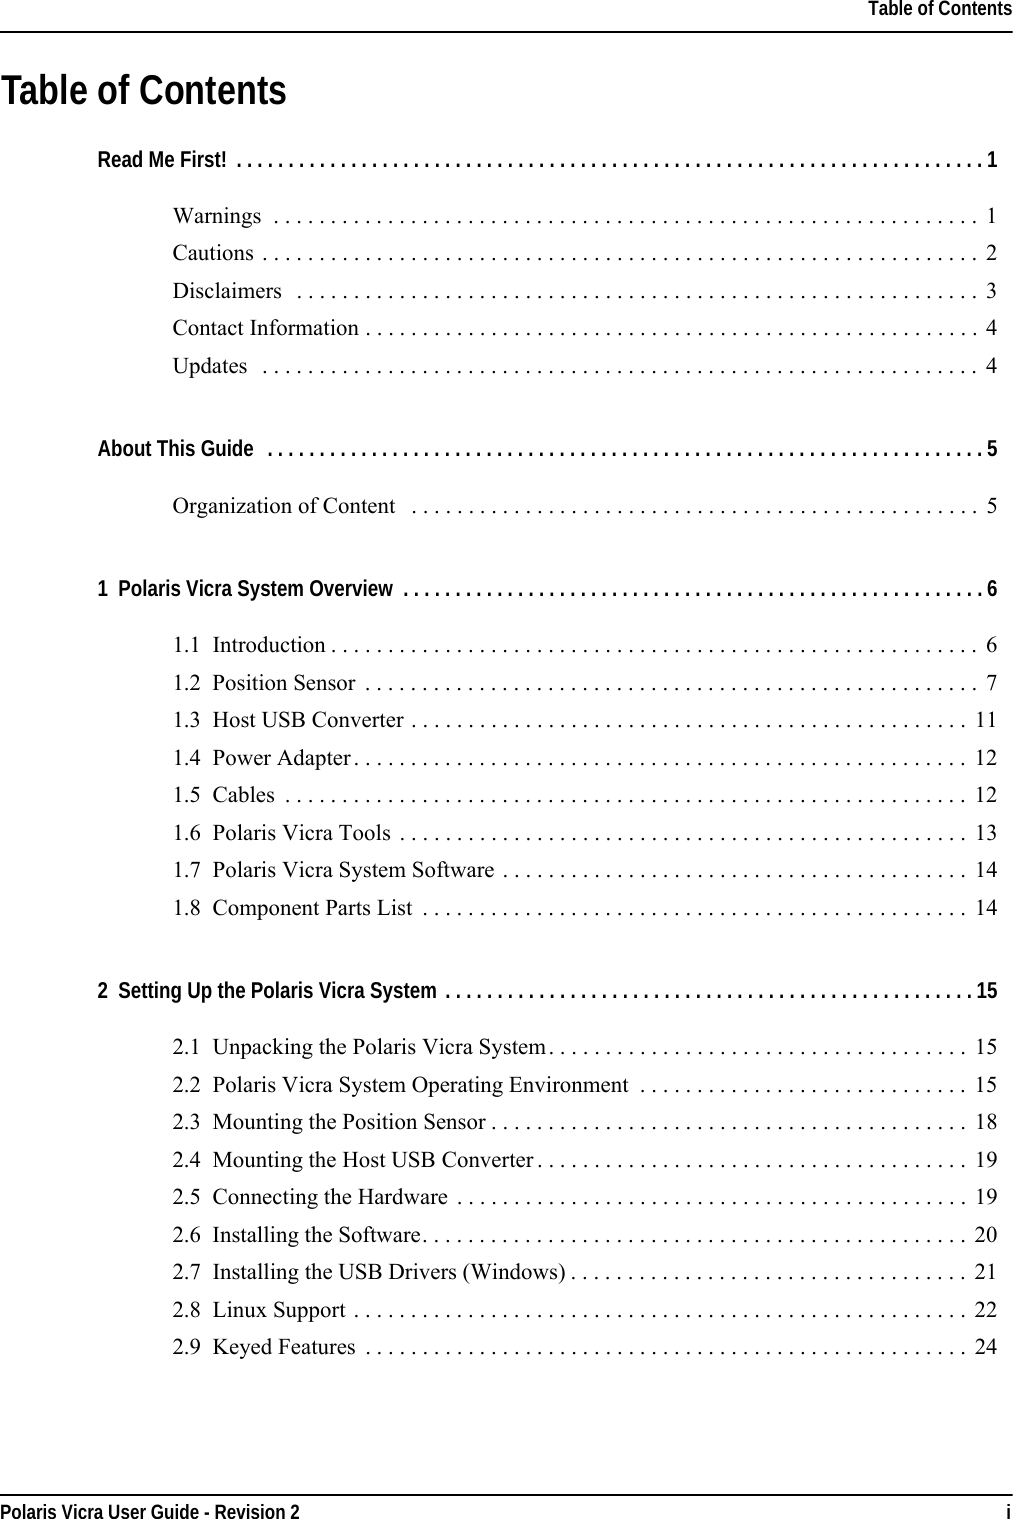 Table of ContentsPolaris Vicra User Guide - Revision 2 iTable of ContentsRead Me First! . . . . . . . . . . . . . . . . . . . . . . . . . . . . . . . . . . . . . . . . . . . . . . . . . . . . . . . . . . . . . . . . . . . . . . . .1Warnings  . . . . . . . . . . . . . . . . . . . . . . . . . . . . . . . . . . . . . . . . . . . . . . . . . . . . . . . . . . . . . .  1Cautions . . . . . . . . . . . . . . . . . . . . . . . . . . . . . . . . . . . . . . . . . . . . . . . . . . . . . . . . . . . . . . .  2Disclaimers   . . . . . . . . . . . . . . . . . . . . . . . . . . . . . . . . . . . . . . . . . . . . . . . . . . . . . . . . . . . .  3Contact Information . . . . . . . . . . . . . . . . . . . . . . . . . . . . . . . . . . . . . . . . . . . . . . . . . . . . . . 4Updates   . . . . . . . . . . . . . . . . . . . . . . . . . . . . . . . . . . . . . . . . . . . . . . . . . . . . . . . . . . . . . . .  4About This Guide  . . . . . . . . . . . . . . . . . . . . . . . . . . . . . . . . . . . . . . . . . . . . . . . . . . . . . . . . . . . . . . . . . . . . .5Organization of Content   . . . . . . . . . . . . . . . . . . . . . . . . . . . . . . . . . . . . . . . . . . . . . . . . . .  51  Polaris Vicra System Overview  . . . . . . . . . . . . . . . . . . . . . . . . . . . . . . . . . . . . . . . . . . . . . . . . . . . . . . . . 61.1  Introduction . . . . . . . . . . . . . . . . . . . . . . . . . . . . . . . . . . . . . . . . . . . . . . . . . . . . . . . . .  61.2  Position Sensor  . . . . . . . . . . . . . . . . . . . . . . . . . . . . . . . . . . . . . . . . . . . . . . . . . . . . . . 71.3  Host USB Converter . . . . . . . . . . . . . . . . . . . . . . . . . . . . . . . . . . . . . . . . . . . . . . . . .  111.4  Power Adapter . . . . . . . . . . . . . . . . . . . . . . . . . . . . . . . . . . . . . . . . . . . . . . . . . . . . . . 121.5  Cables  . . . . . . . . . . . . . . . . . . . . . . . . . . . . . . . . . . . . . . . . . . . . . . . . . . . . . . . . . . . .  121.6  Polaris Vicra Tools  . . . . . . . . . . . . . . . . . . . . . . . . . . . . . . . . . . . . . . . . . . . . . . . . . .  131.7  Polaris Vicra System Software . . . . . . . . . . . . . . . . . . . . . . . . . . . . . . . . . . . . . . . . .  141.8  Component Parts List  . . . . . . . . . . . . . . . . . . . . . . . . . . . . . . . . . . . . . . . . . . . . . . . .  142  Setting Up the Polaris Vicra System . . . . . . . . . . . . . . . . . . . . . . . . . . . . . . . . . . . . . . . . . . . . . . . . . . . 152.1  Unpacking the Polaris Vicra System. . . . . . . . . . . . . . . . . . . . . . . . . . . . . . . . . . . . .  152.2  Polaris Vicra System Operating Environment  . . . . . . . . . . . . . . . . . . . . . . . . . . . . . 152.3  Mounting the Position Sensor . . . . . . . . . . . . . . . . . . . . . . . . . . . . . . . . . . . . . . . . . . 182.4  Mounting the Host USB Converter . . . . . . . . . . . . . . . . . . . . . . . . . . . . . . . . . . . . . . 192.5  Connecting the Hardware  . . . . . . . . . . . . . . . . . . . . . . . . . . . . . . . . . . . . . . . . . . . . .  192.6  Installing the Software. . . . . . . . . . . . . . . . . . . . . . . . . . . . . . . . . . . . . . . . . . . . . . . .  202.7  Installing the USB Drivers (Windows) . . . . . . . . . . . . . . . . . . . . . . . . . . . . . . . . . . . 212.8  Linux Support . . . . . . . . . . . . . . . . . . . . . . . . . . . . . . . . . . . . . . . . . . . . . . . . . . . . . . 222.9  Keyed Features  . . . . . . . . . . . . . . . . . . . . . . . . . . . . . . . . . . . . . . . . . . . . . . . . . . . . . 24